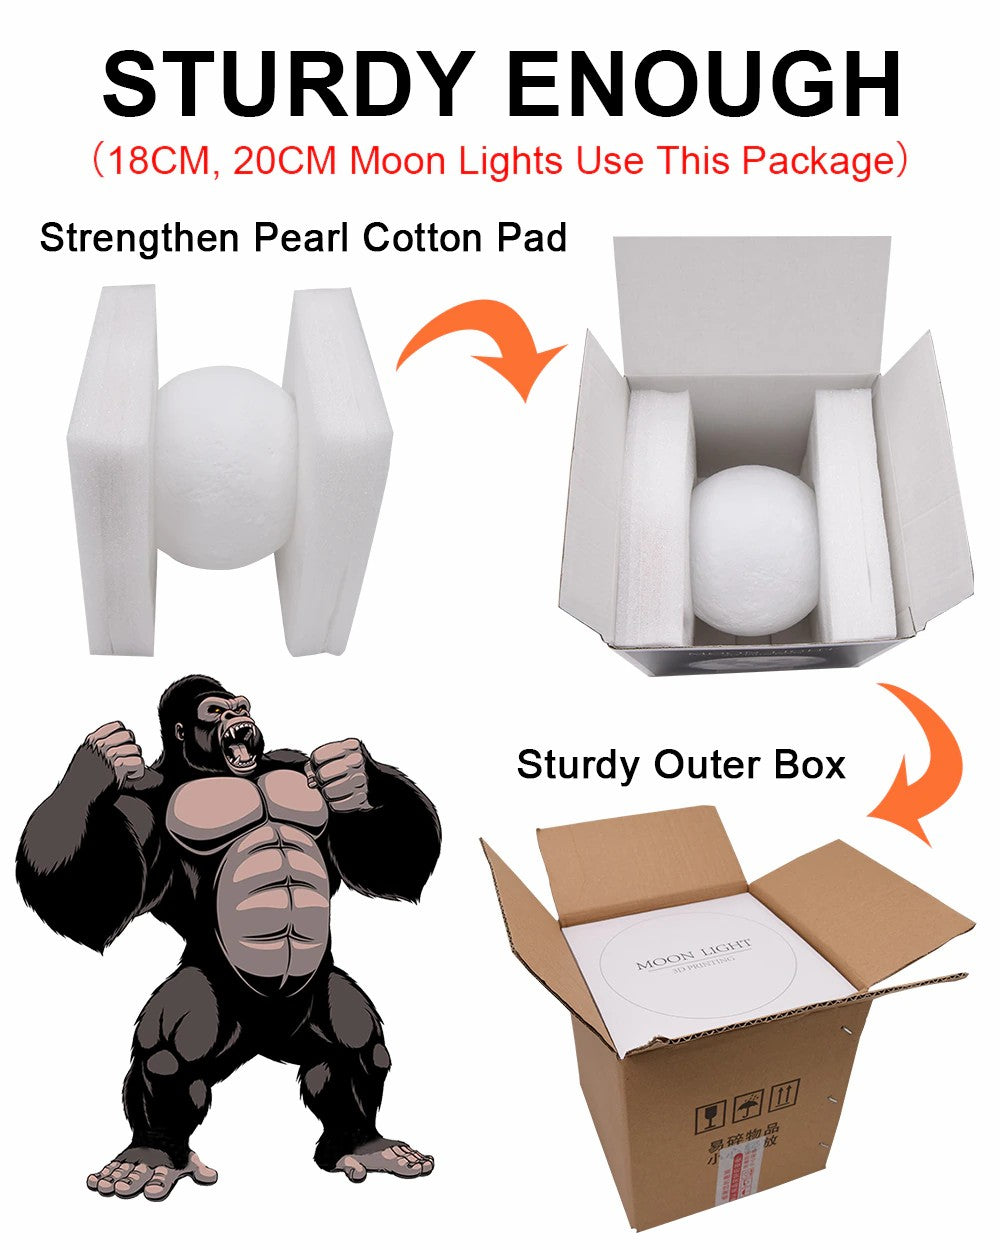 3D Moon Night Light -  Rechargeable / Tap Control lamp lights 16 Colors